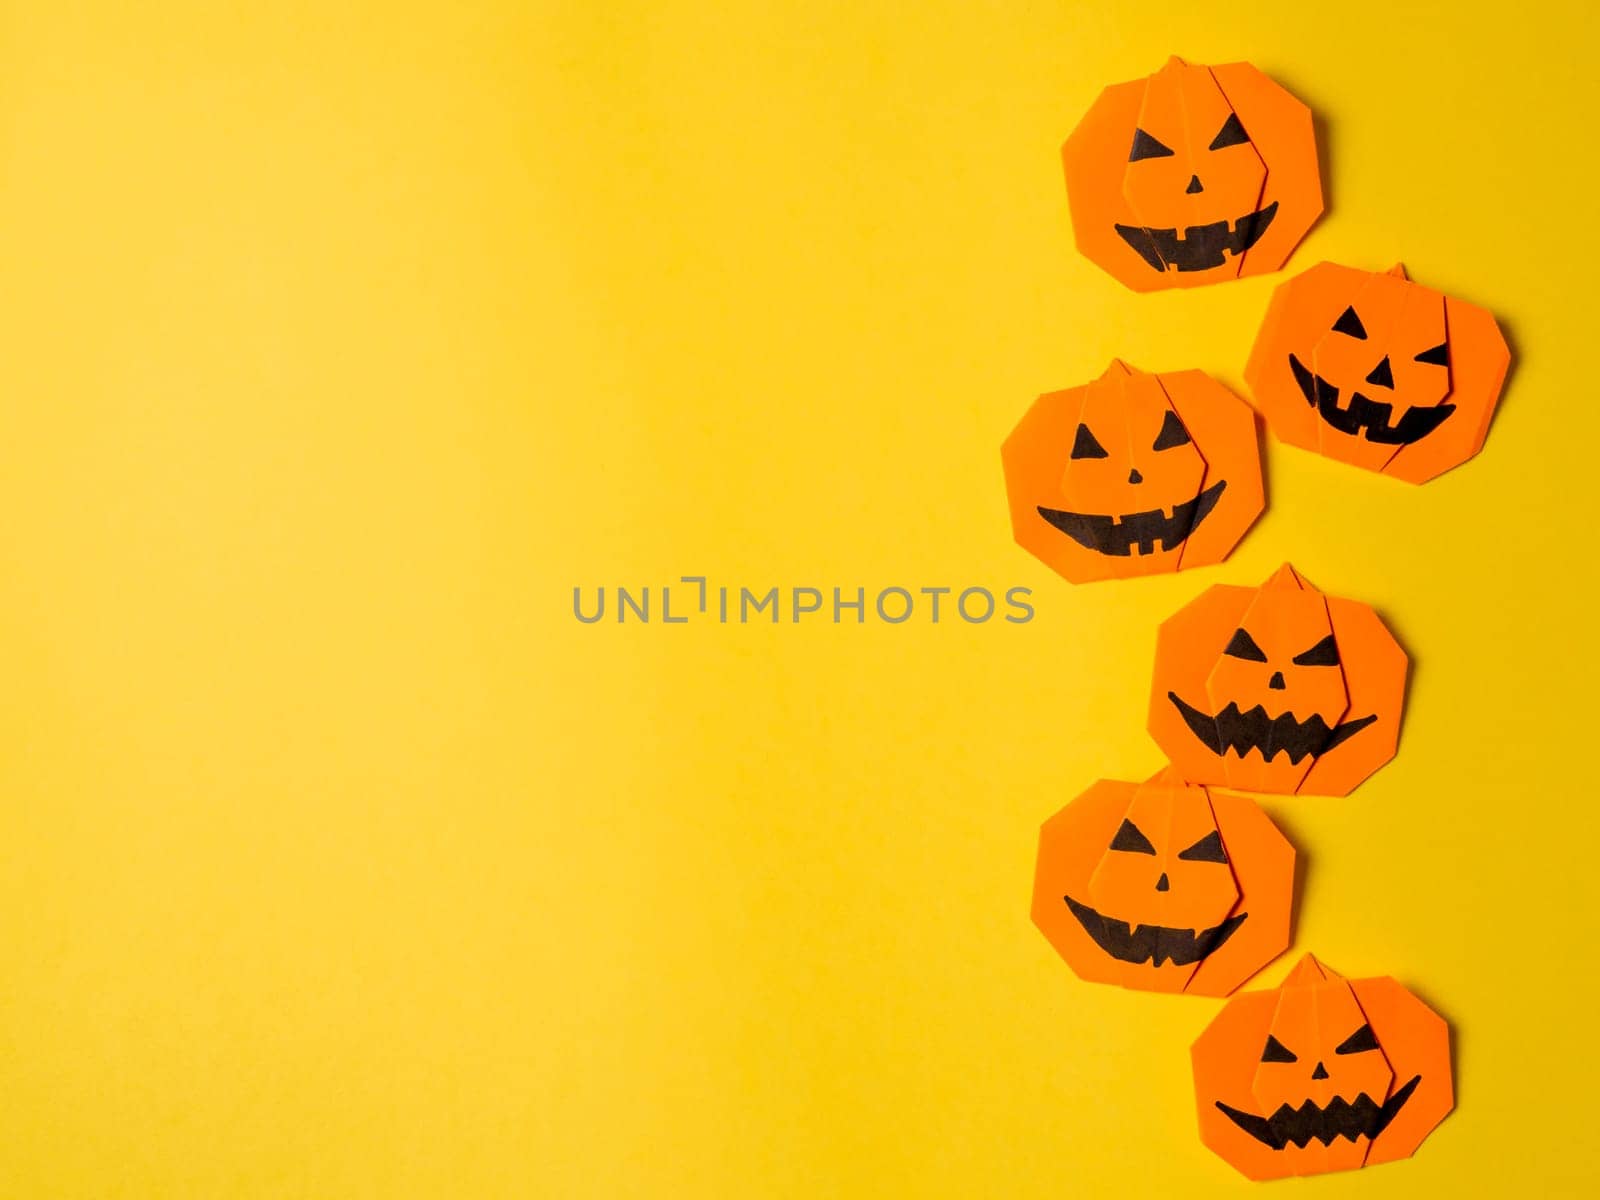 Halloween concept. Paper origami pumpkin on yellow background. Simple idea for halloween - easy made paper pumpkins on trendy color Ceylon Yellow background. Copy space for text.